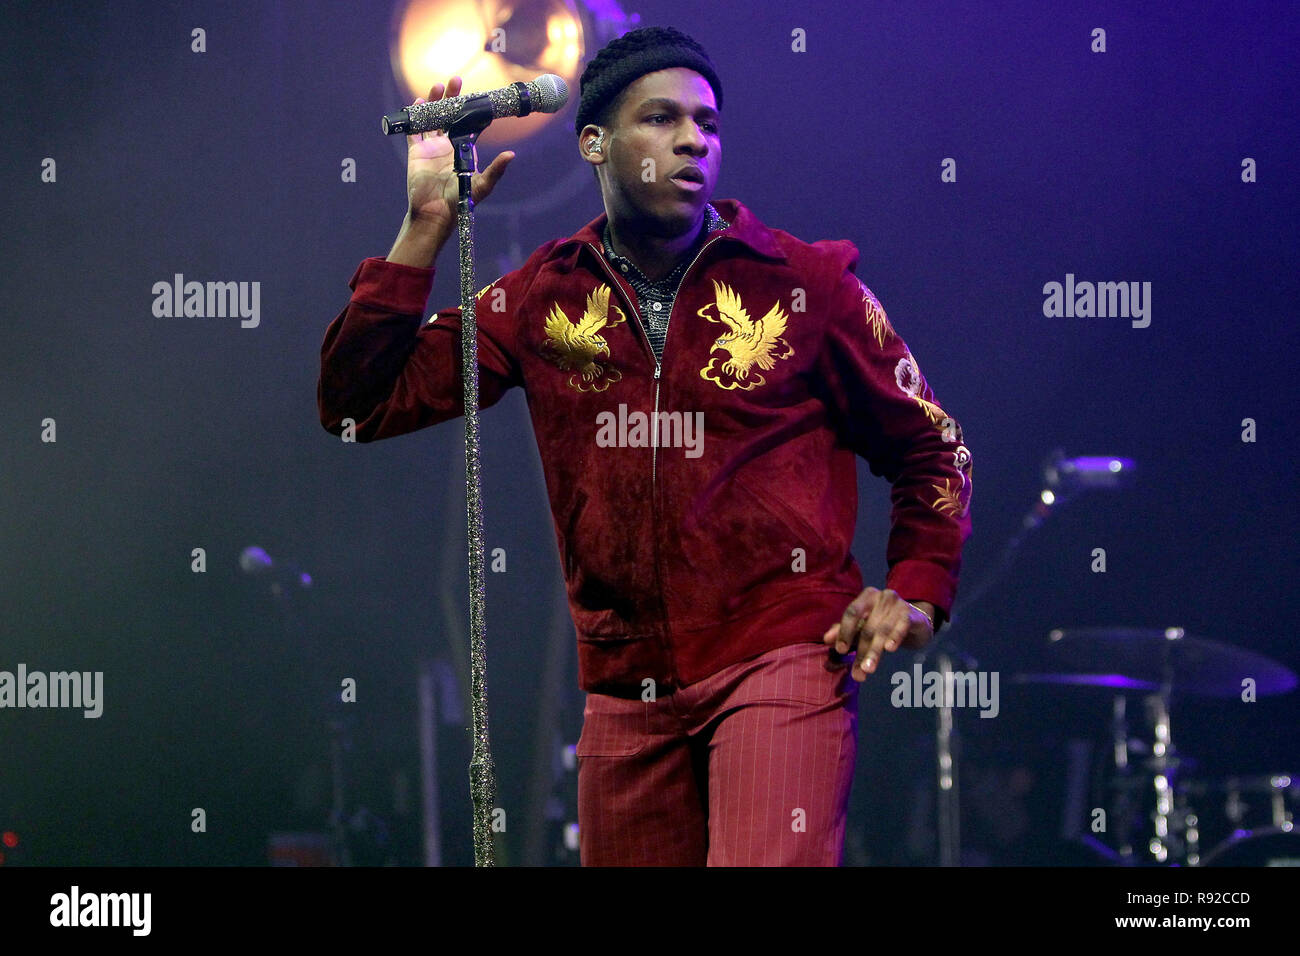 American singer/songwriter Leon Bridges performing during the 1st of 2 sold out nights at the O2 Academy Brixton in London on Saturday 17th November 2018 (Photos by Ian Bines/WENN)  Featuring: leon bridges Where: London, United Kingdom When: 17 Nov 2018 Credit: WENN.com Stock Photo